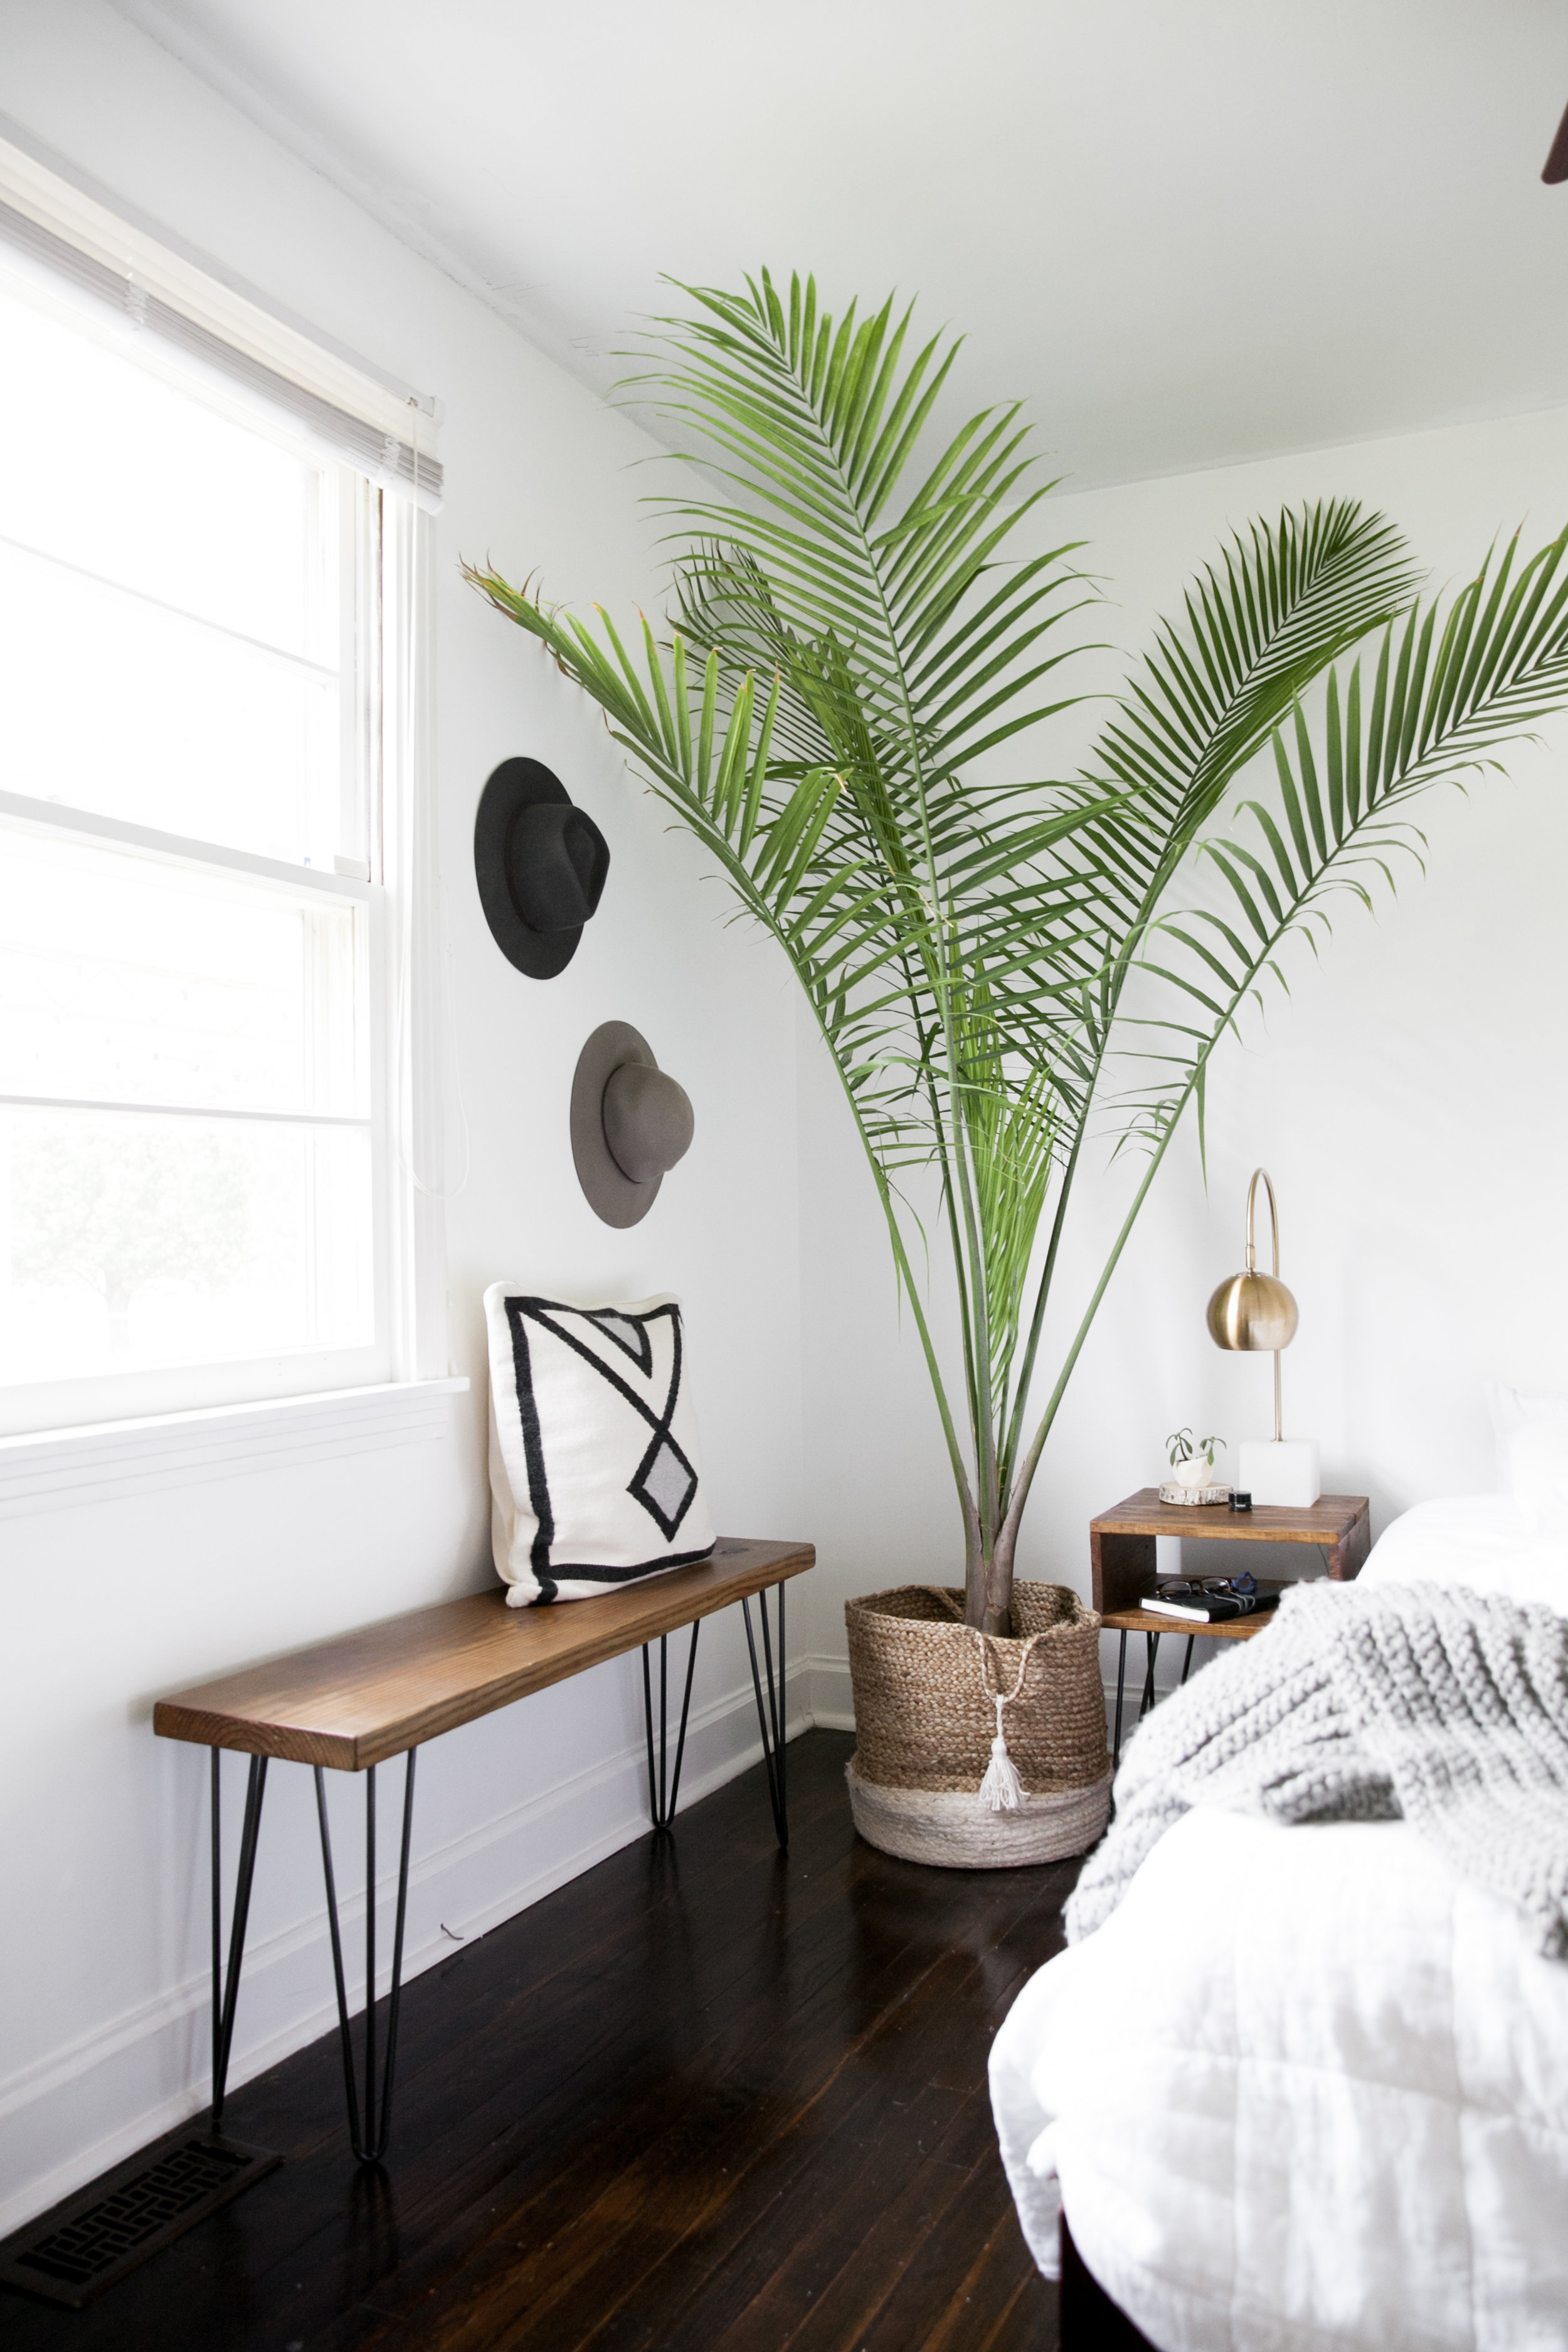 15 Fascinating Bedrooms With Plants That Look Like A Jungle   Page 2 of 3